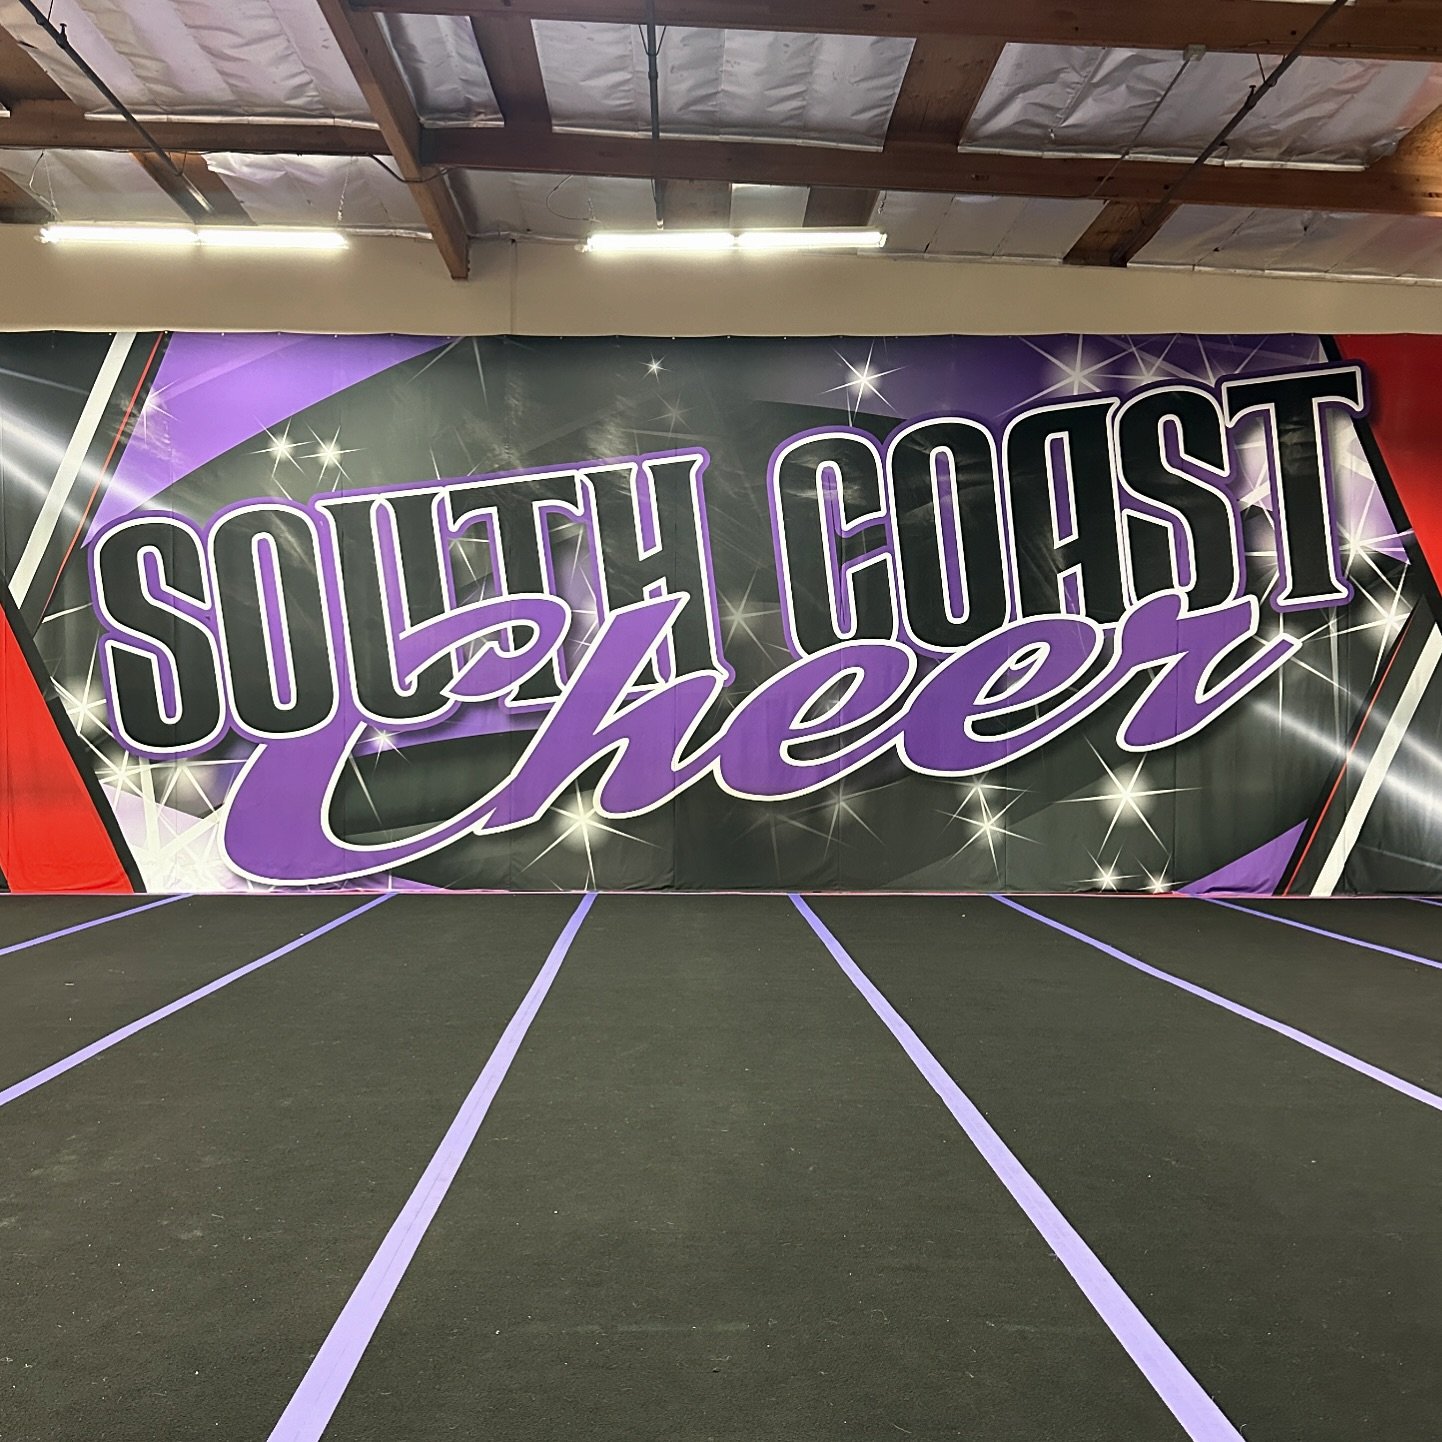 Closing out day ✌️of tryouts at The Coast! This is our biggest turnout yet and we can&rsquo;t wait for all our callbacks! First up&hellip; tumbling callbacks! See you all tomorrow 💜🖤 #SouthCoastCheer #CFIO